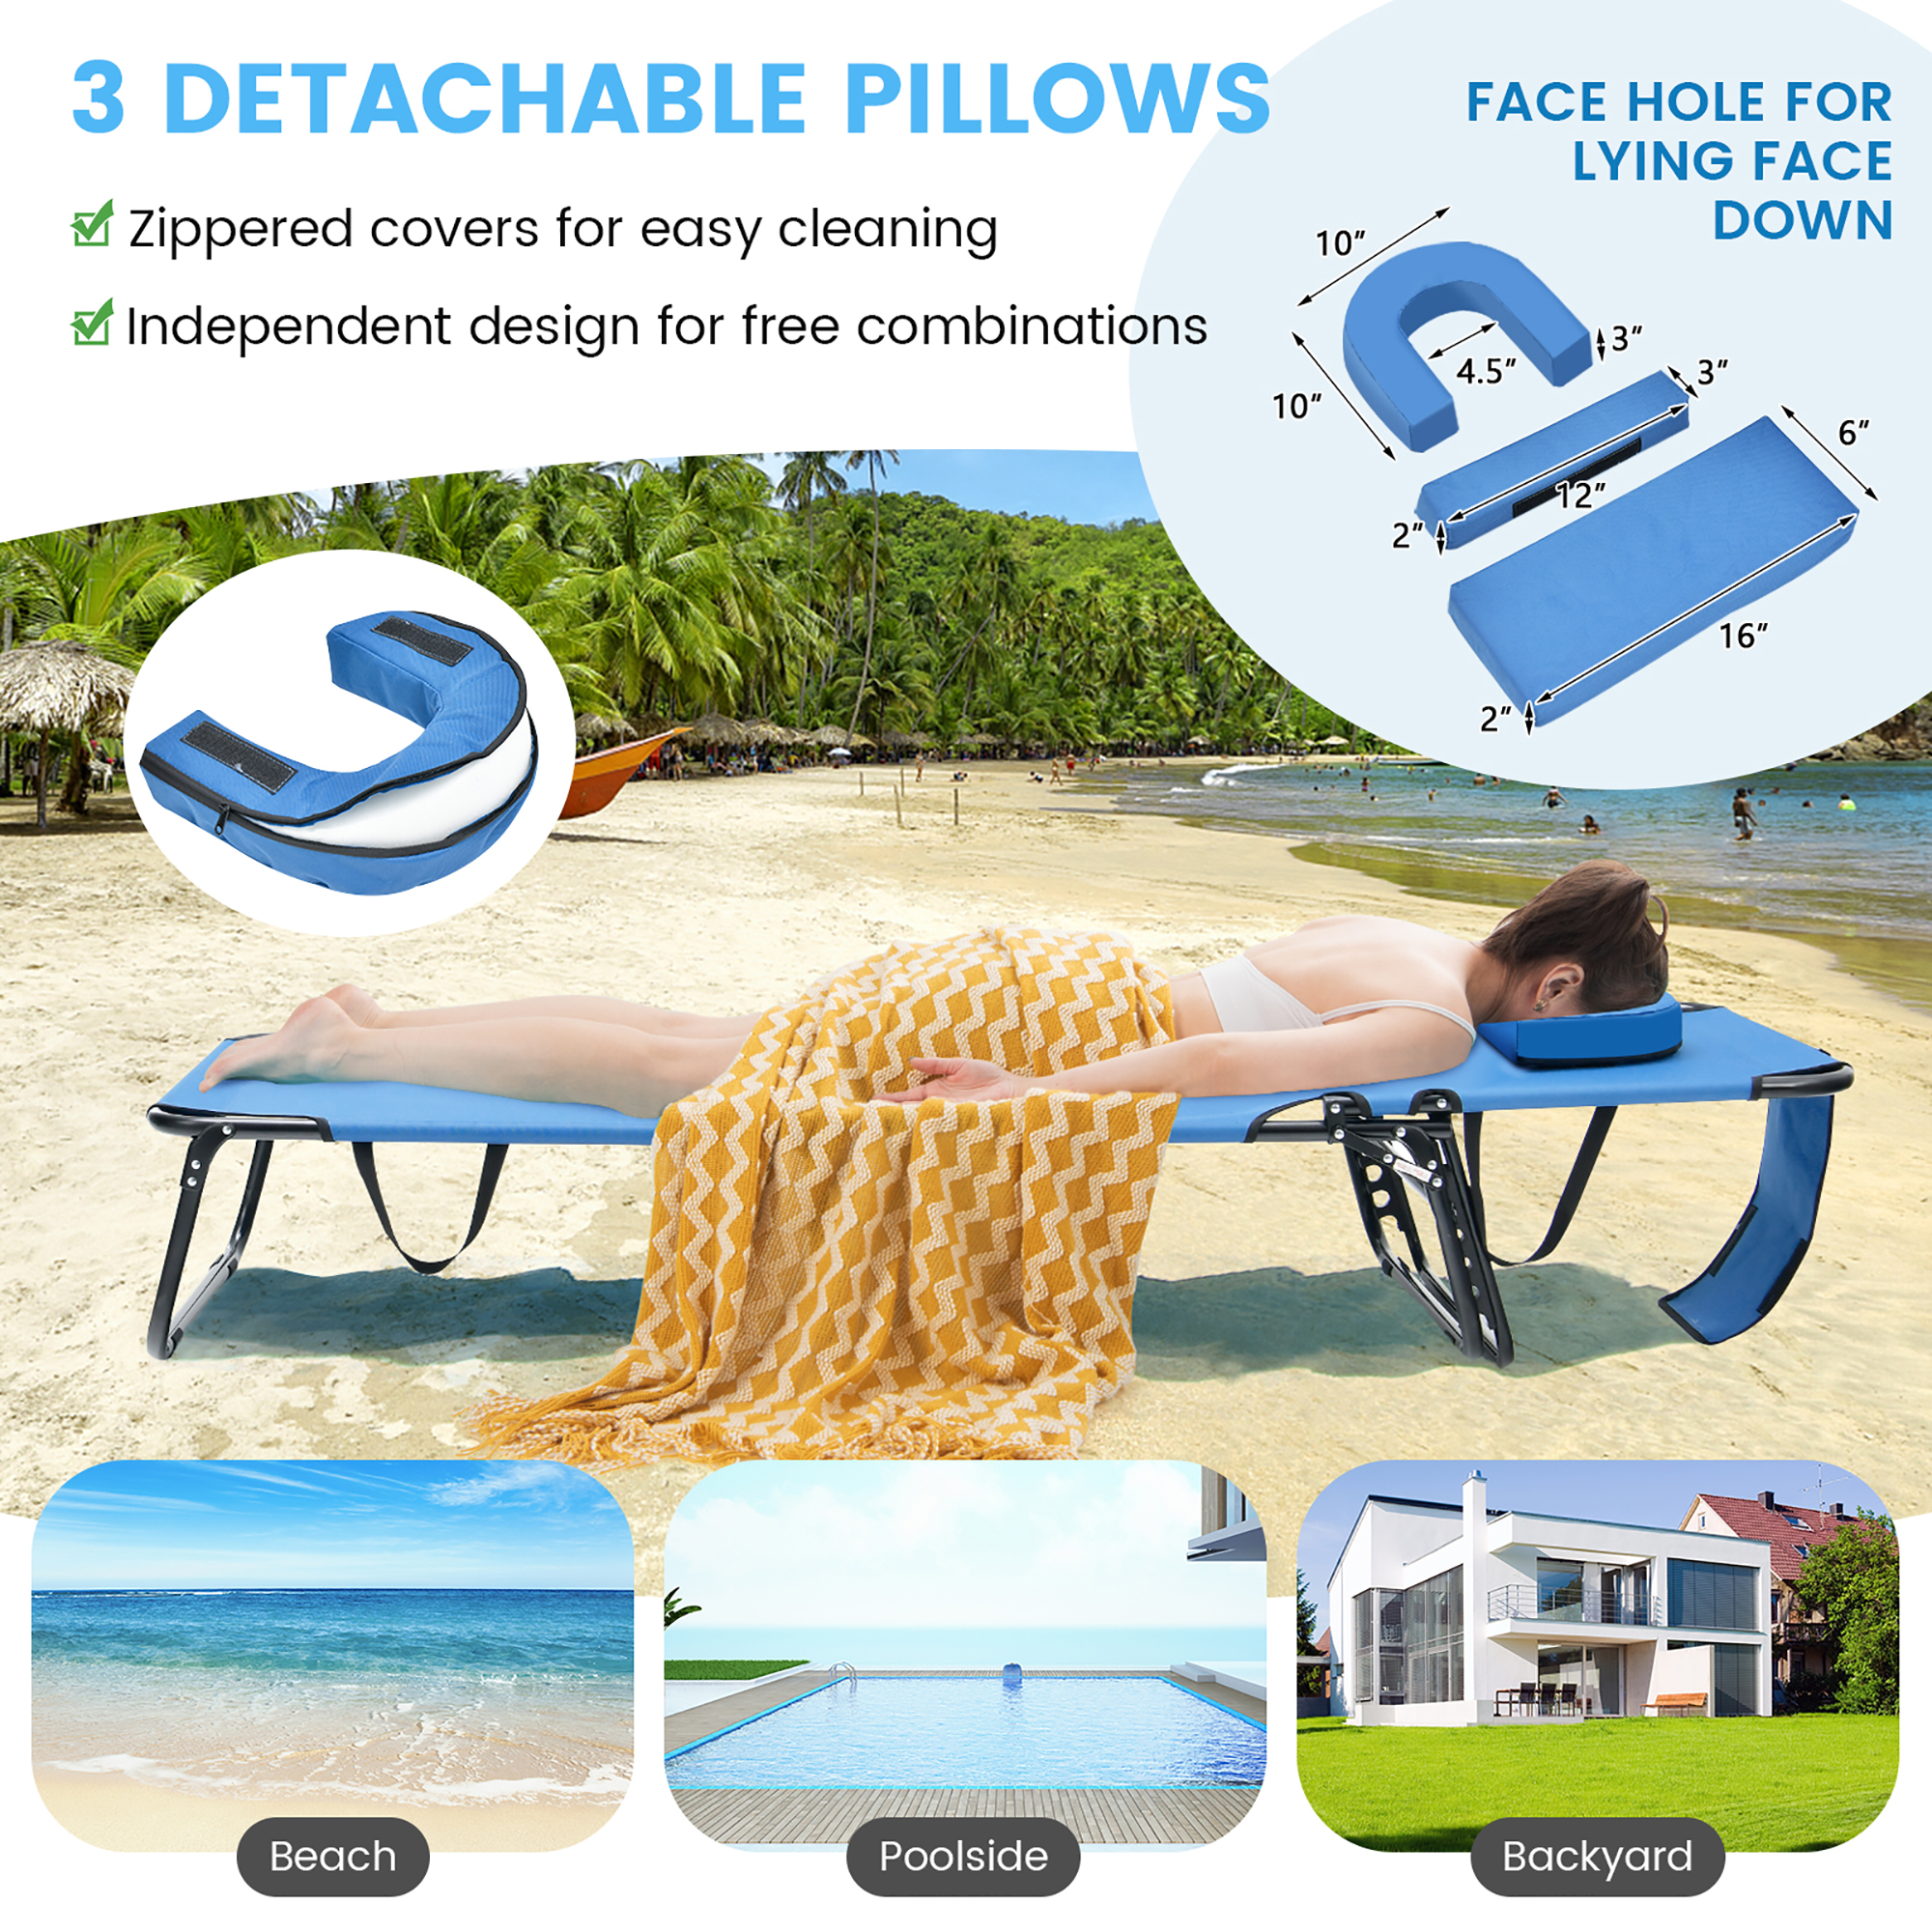 Costway 2 PCS Beach Chaise Lounge Chair with Face Hole Pillows & Adjustable Backrest Blue - image 3 of 10